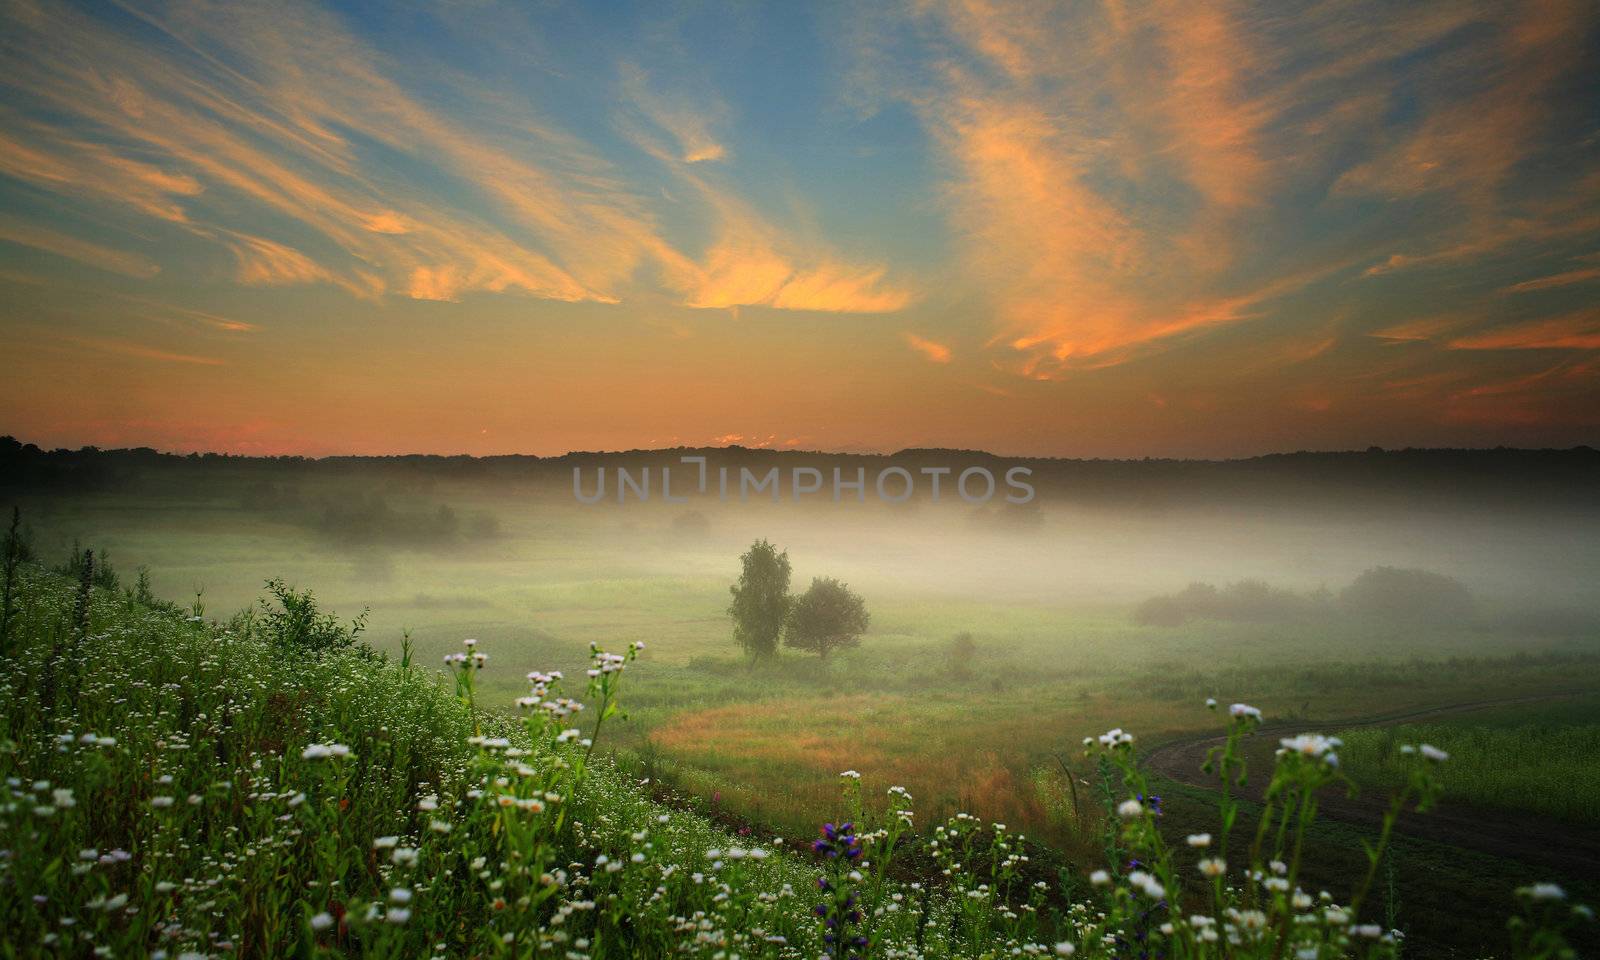 An image of misty landscape with flowers and trees